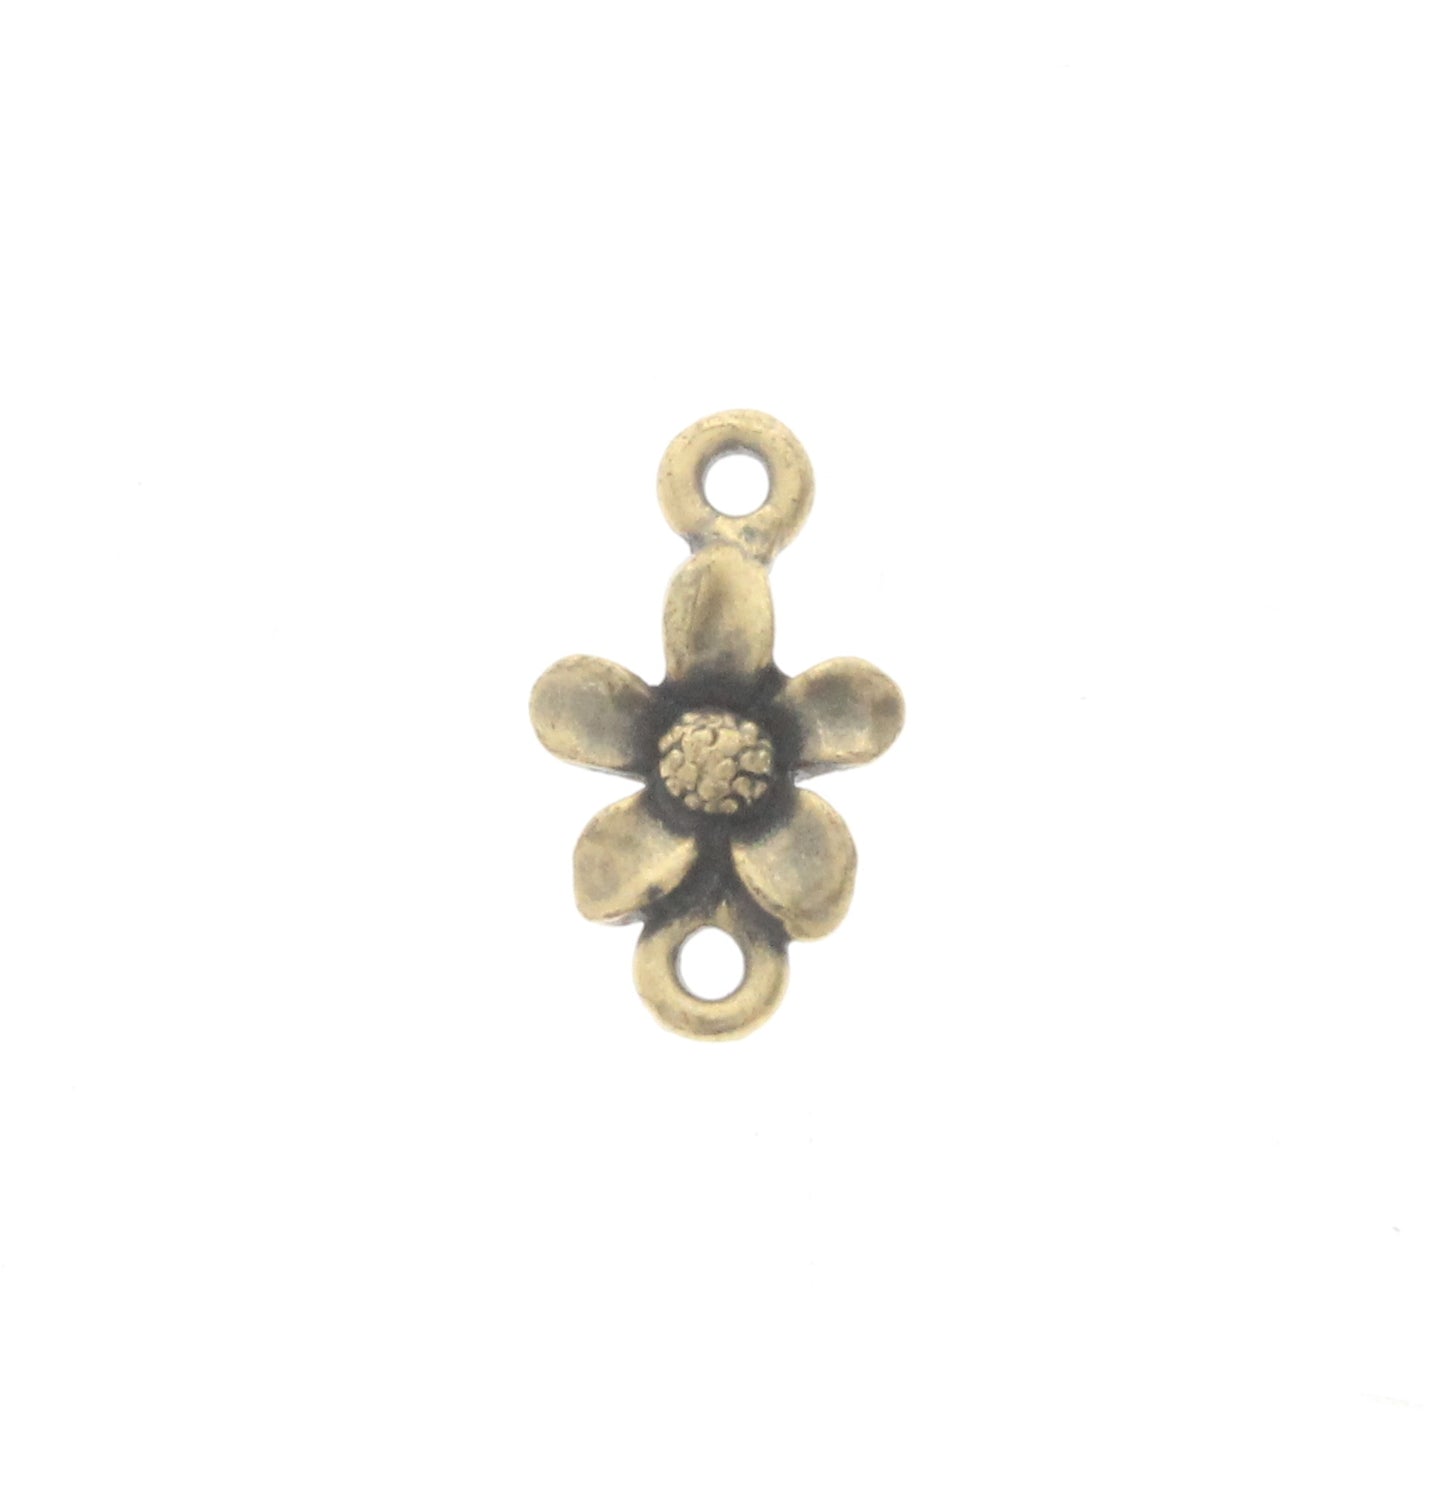 2 Ring Flower Connector Charm, Pk/6